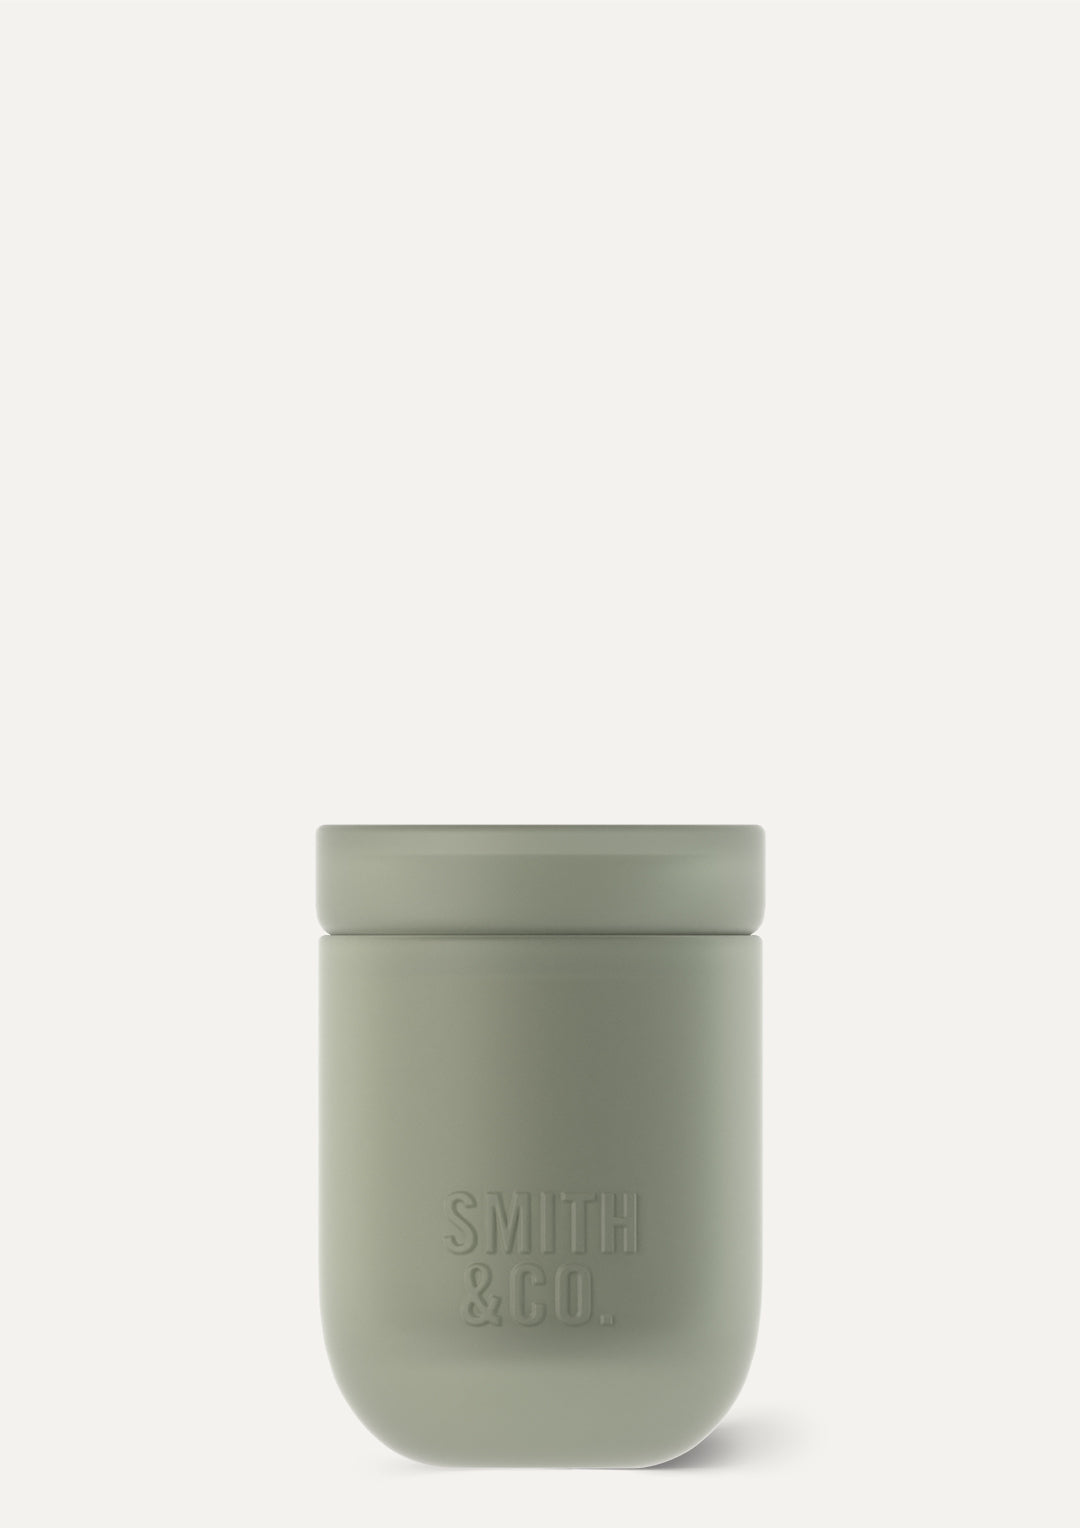 Smith & Co. Candle 250g - Amber & Freesia